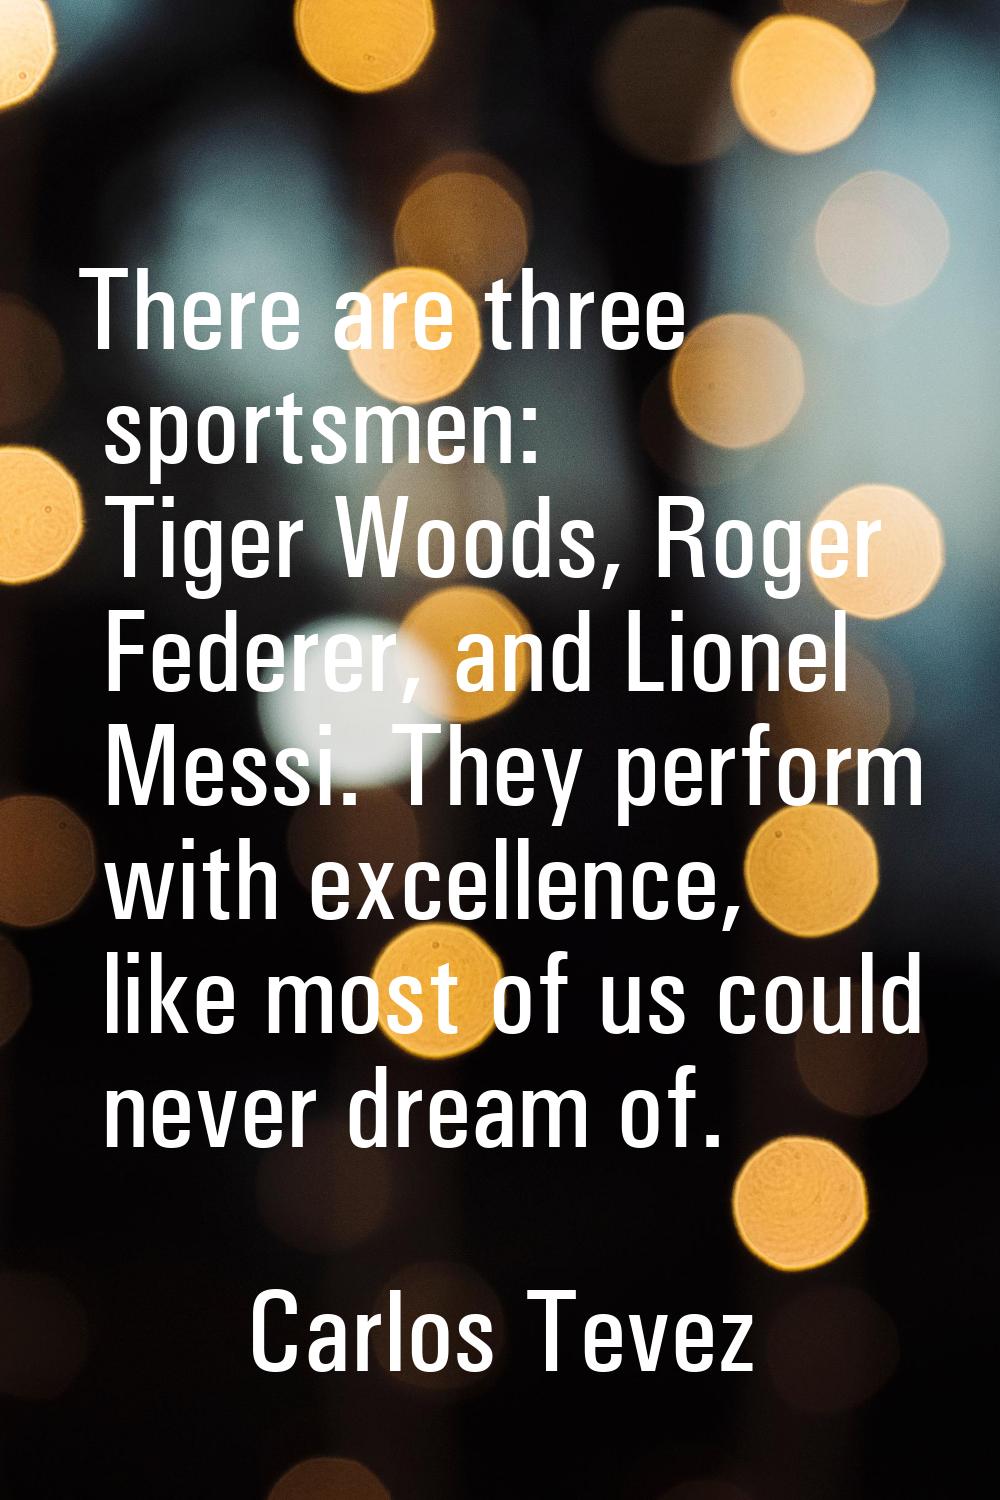 There are three sportsmen: Tiger Woods, Roger Federer, and Lionel Messi. They perform with excellen